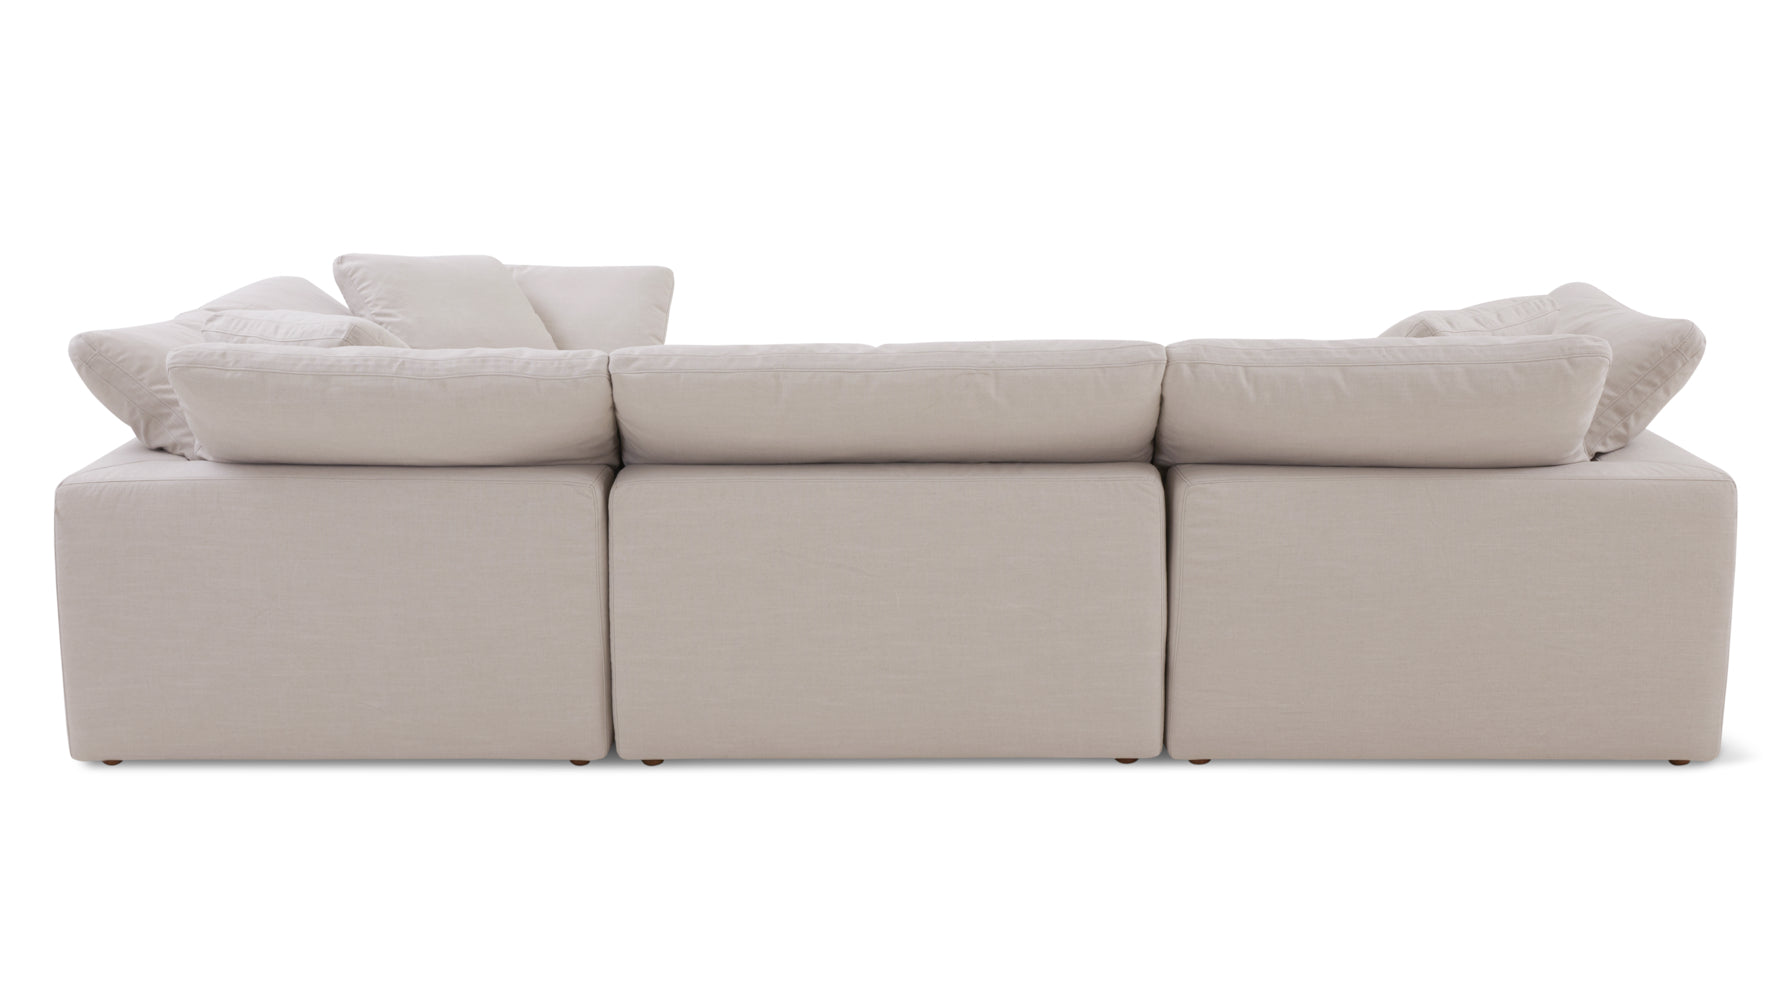 Movie Night™ 4-Piece Modular Sectional Closed, Large, Clay - Image 9